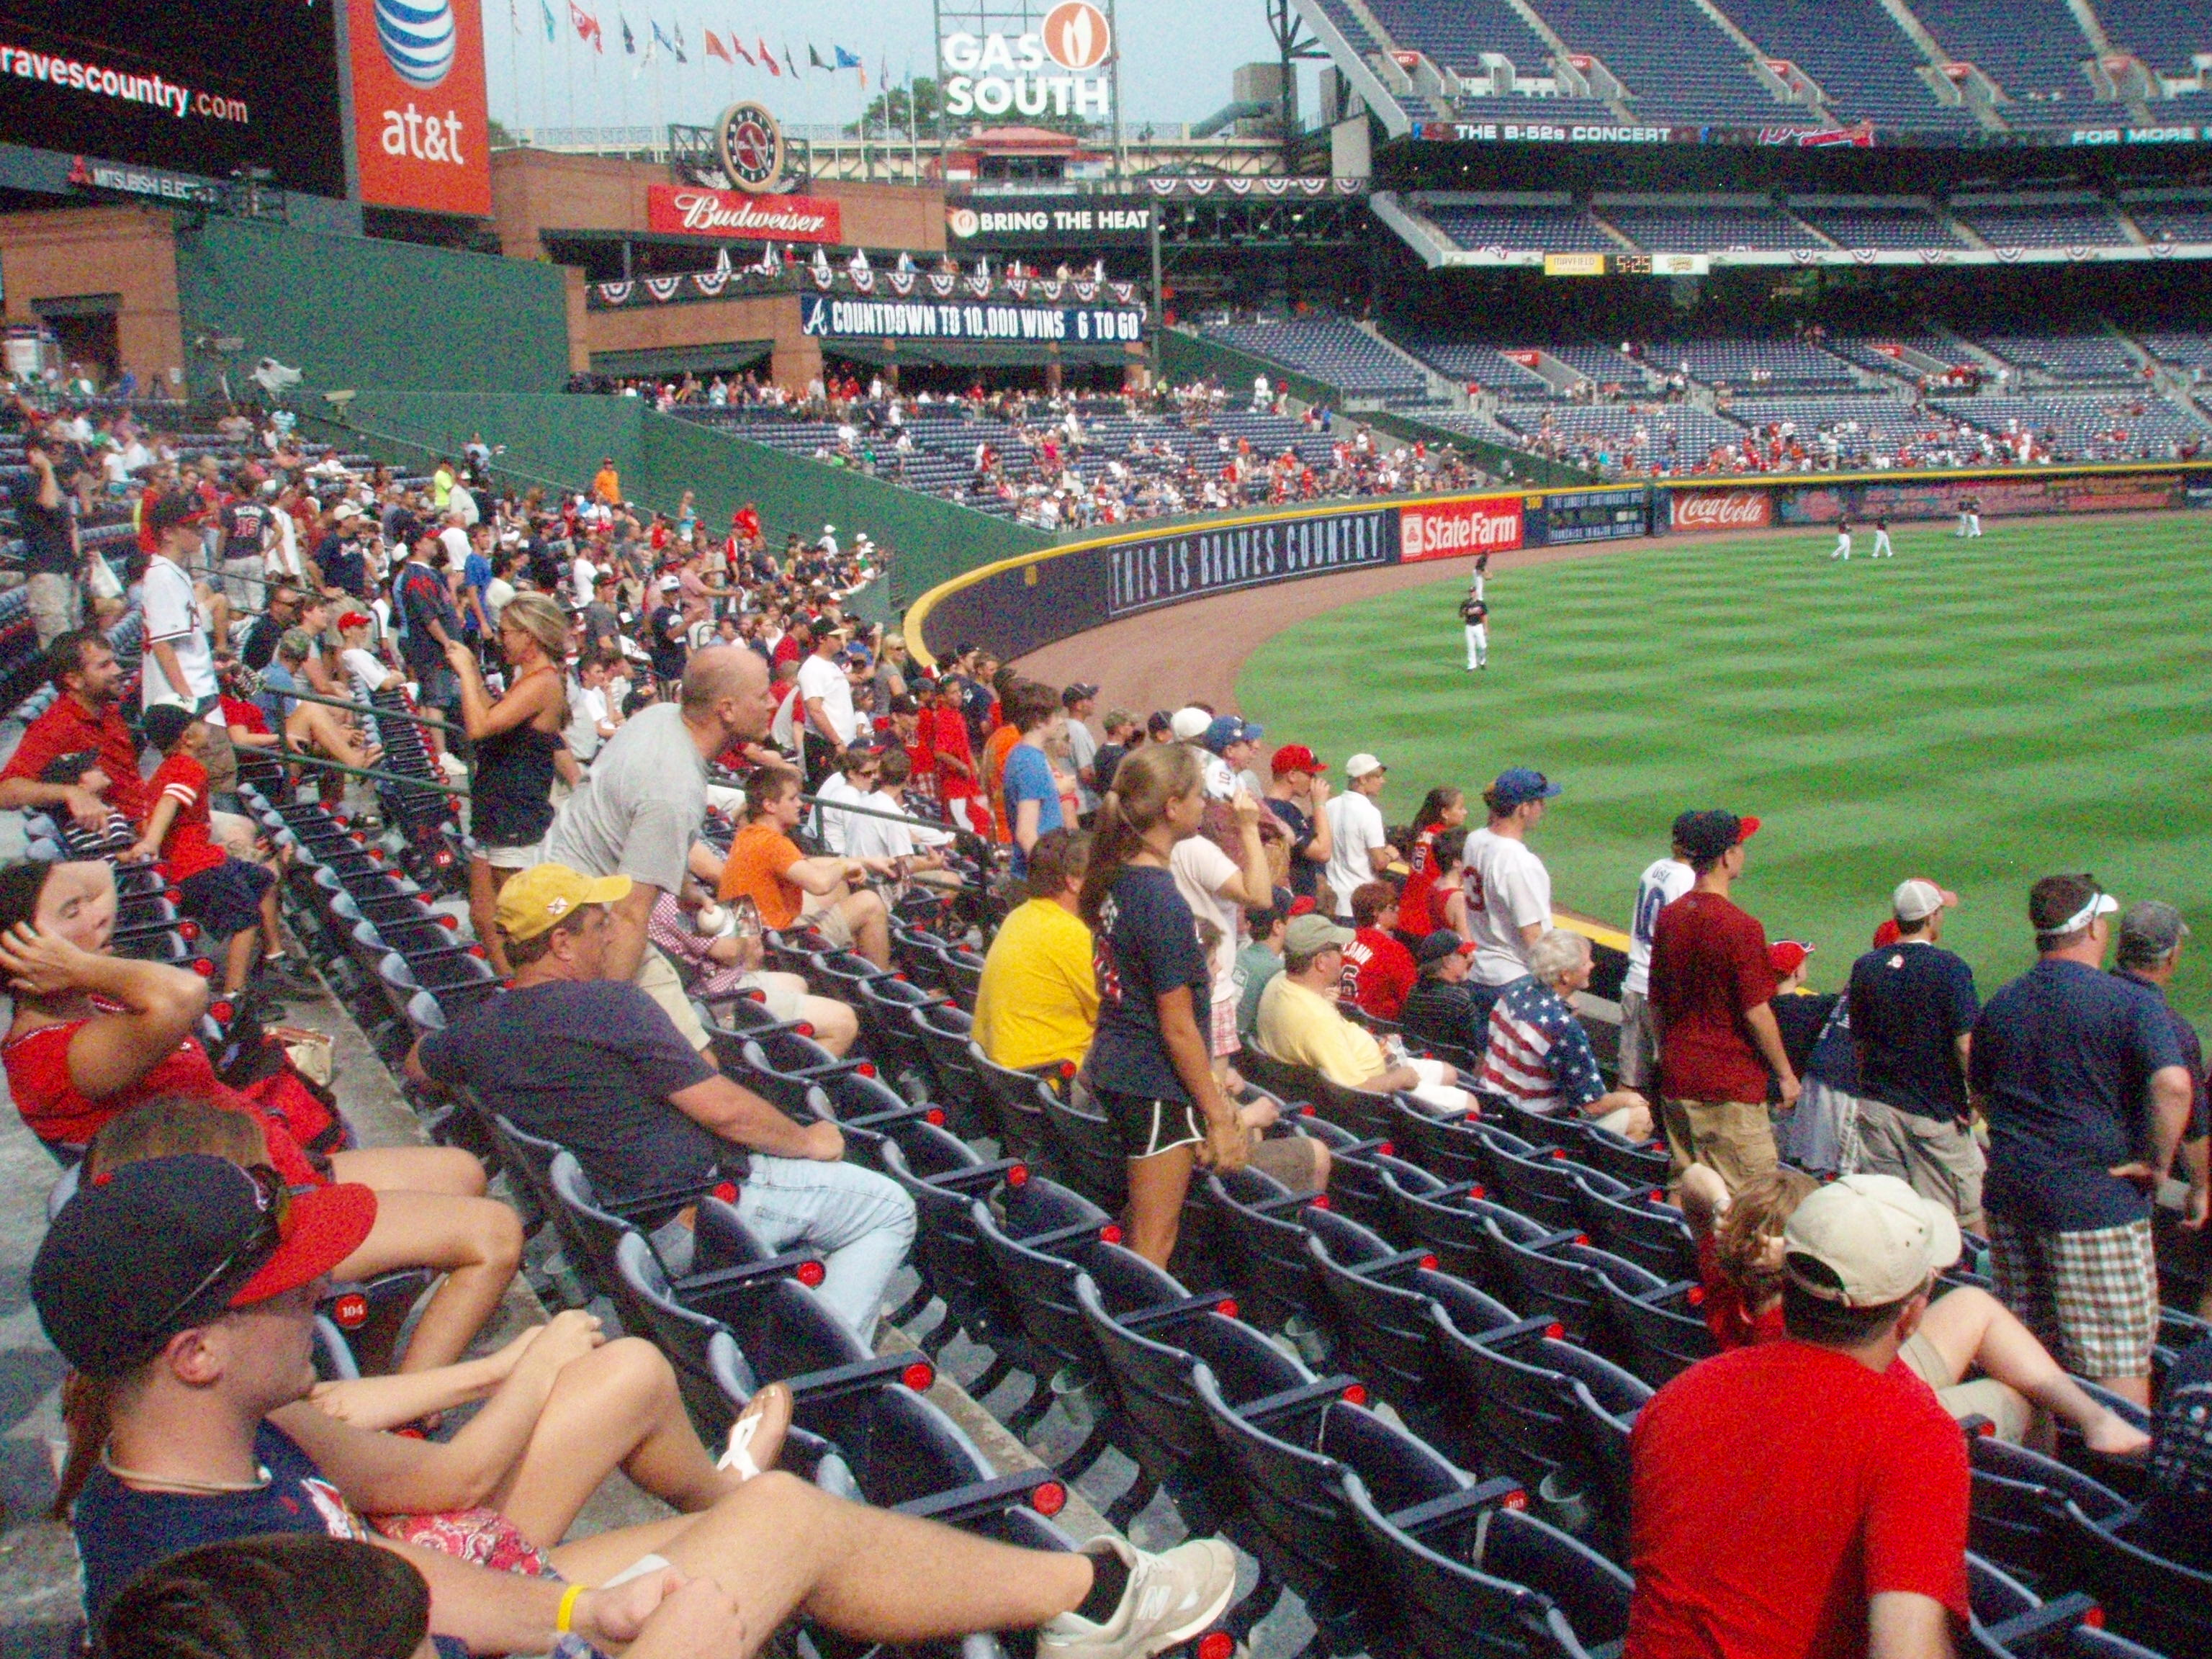 Baseball Stadium Crowd Background You Can See In The